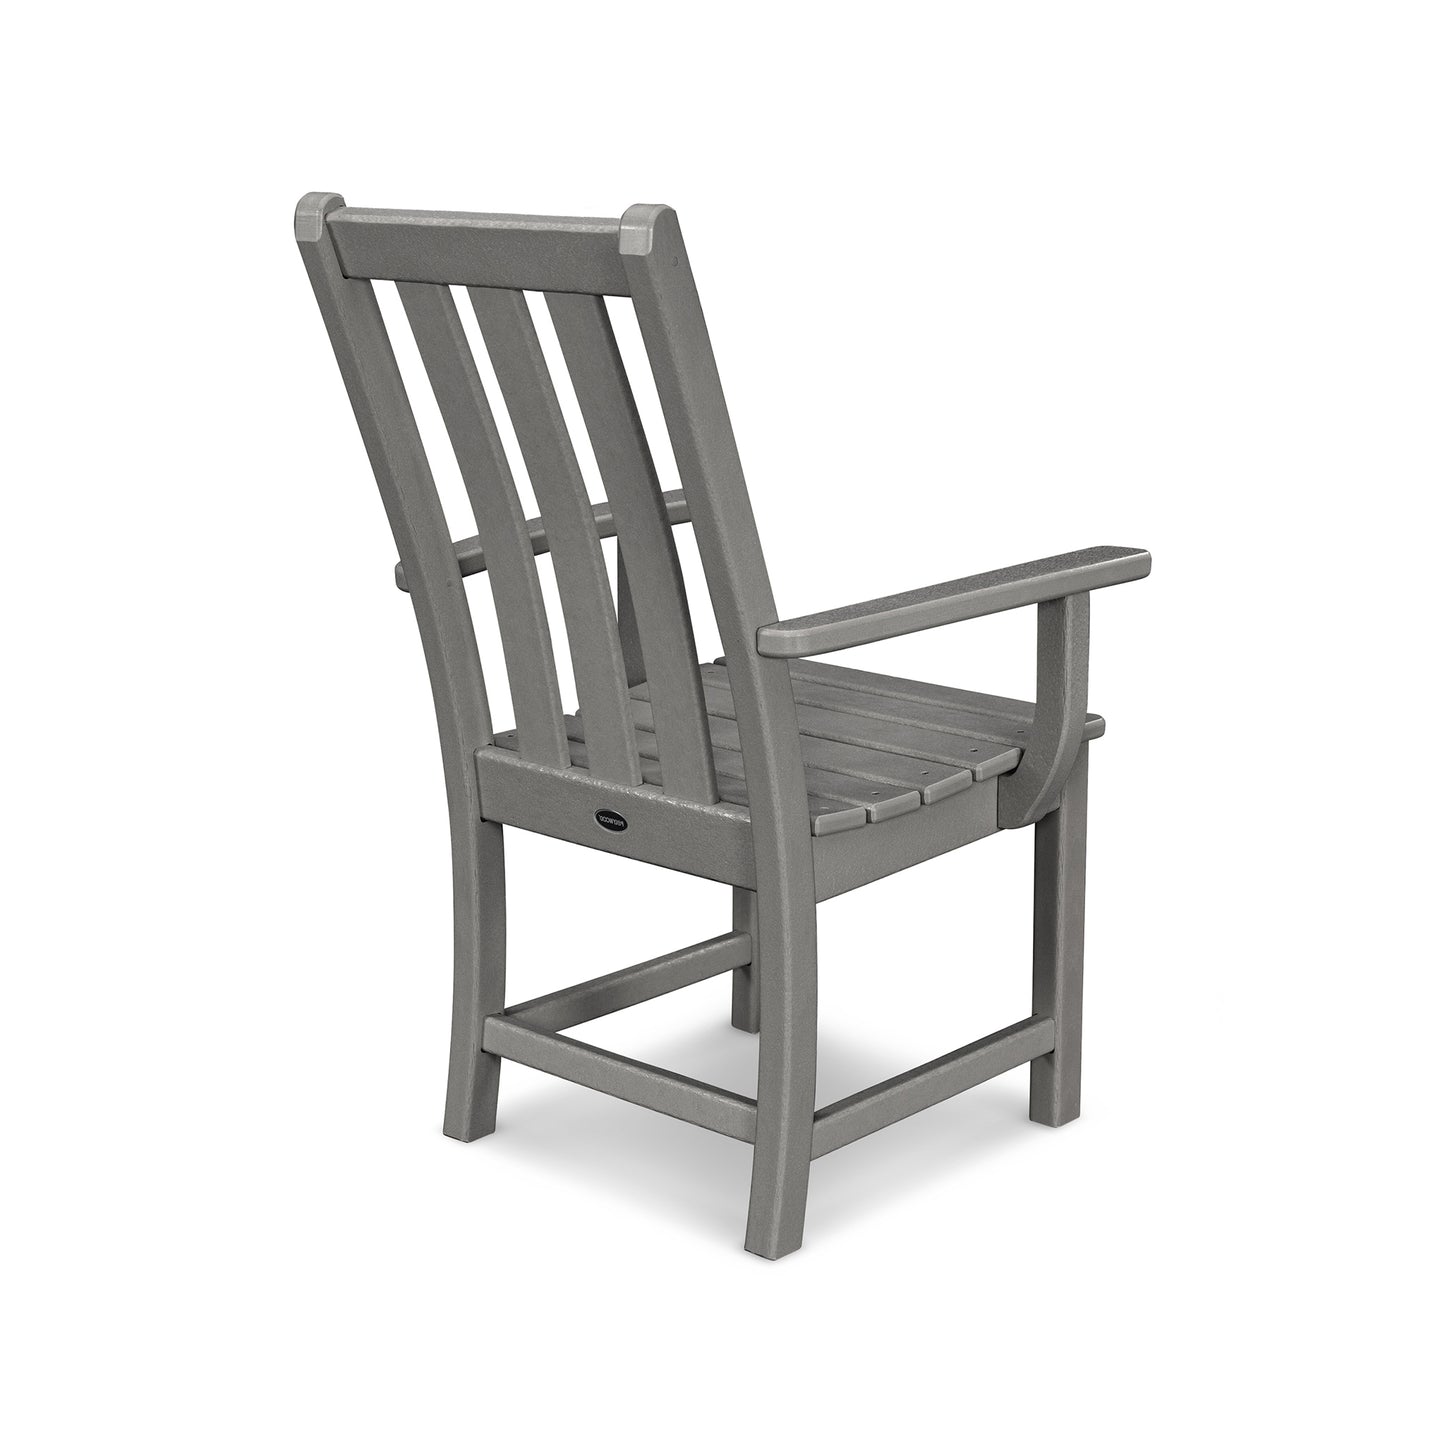 A gray, traditional-styled POLYWOOD Vineyard Dining Arm Chair made of plastic, featuring a slanted back and wide armrests. The chair is isolated on a white background.